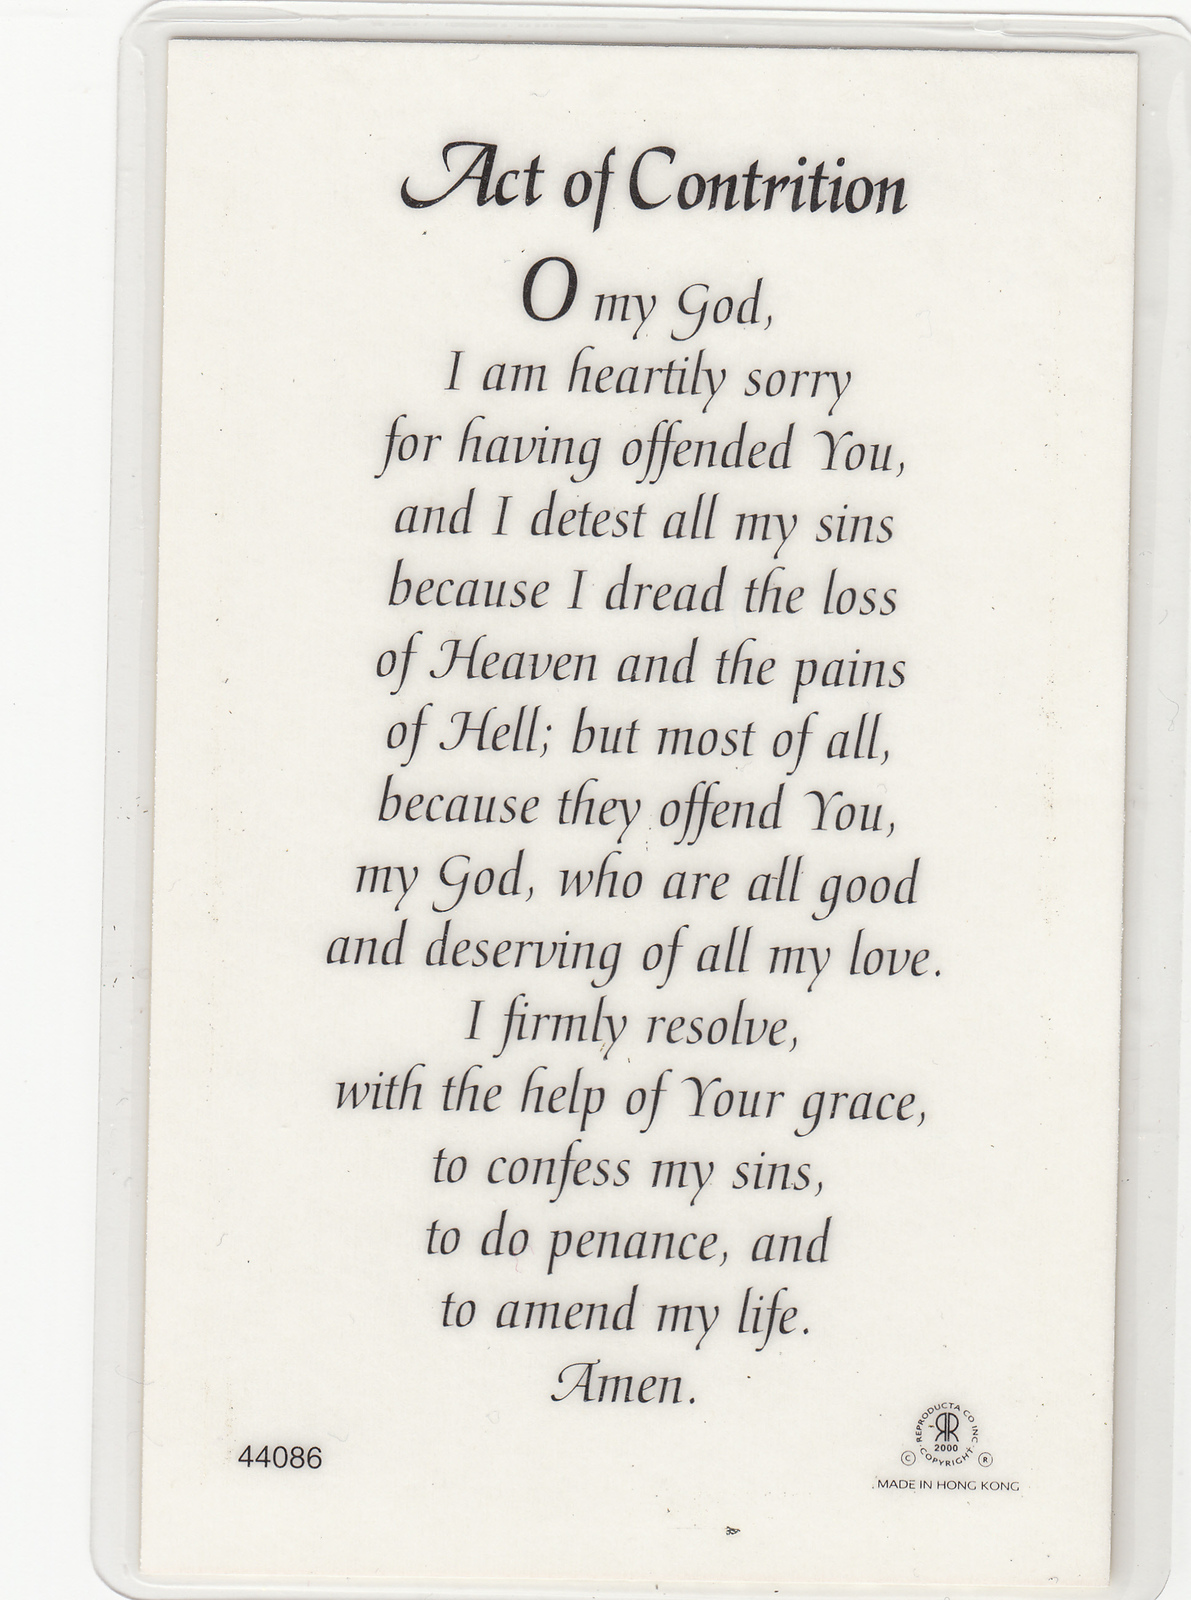 art-of-contrition-laminated-prayer-card-110-x-70mm-holy-card-printed